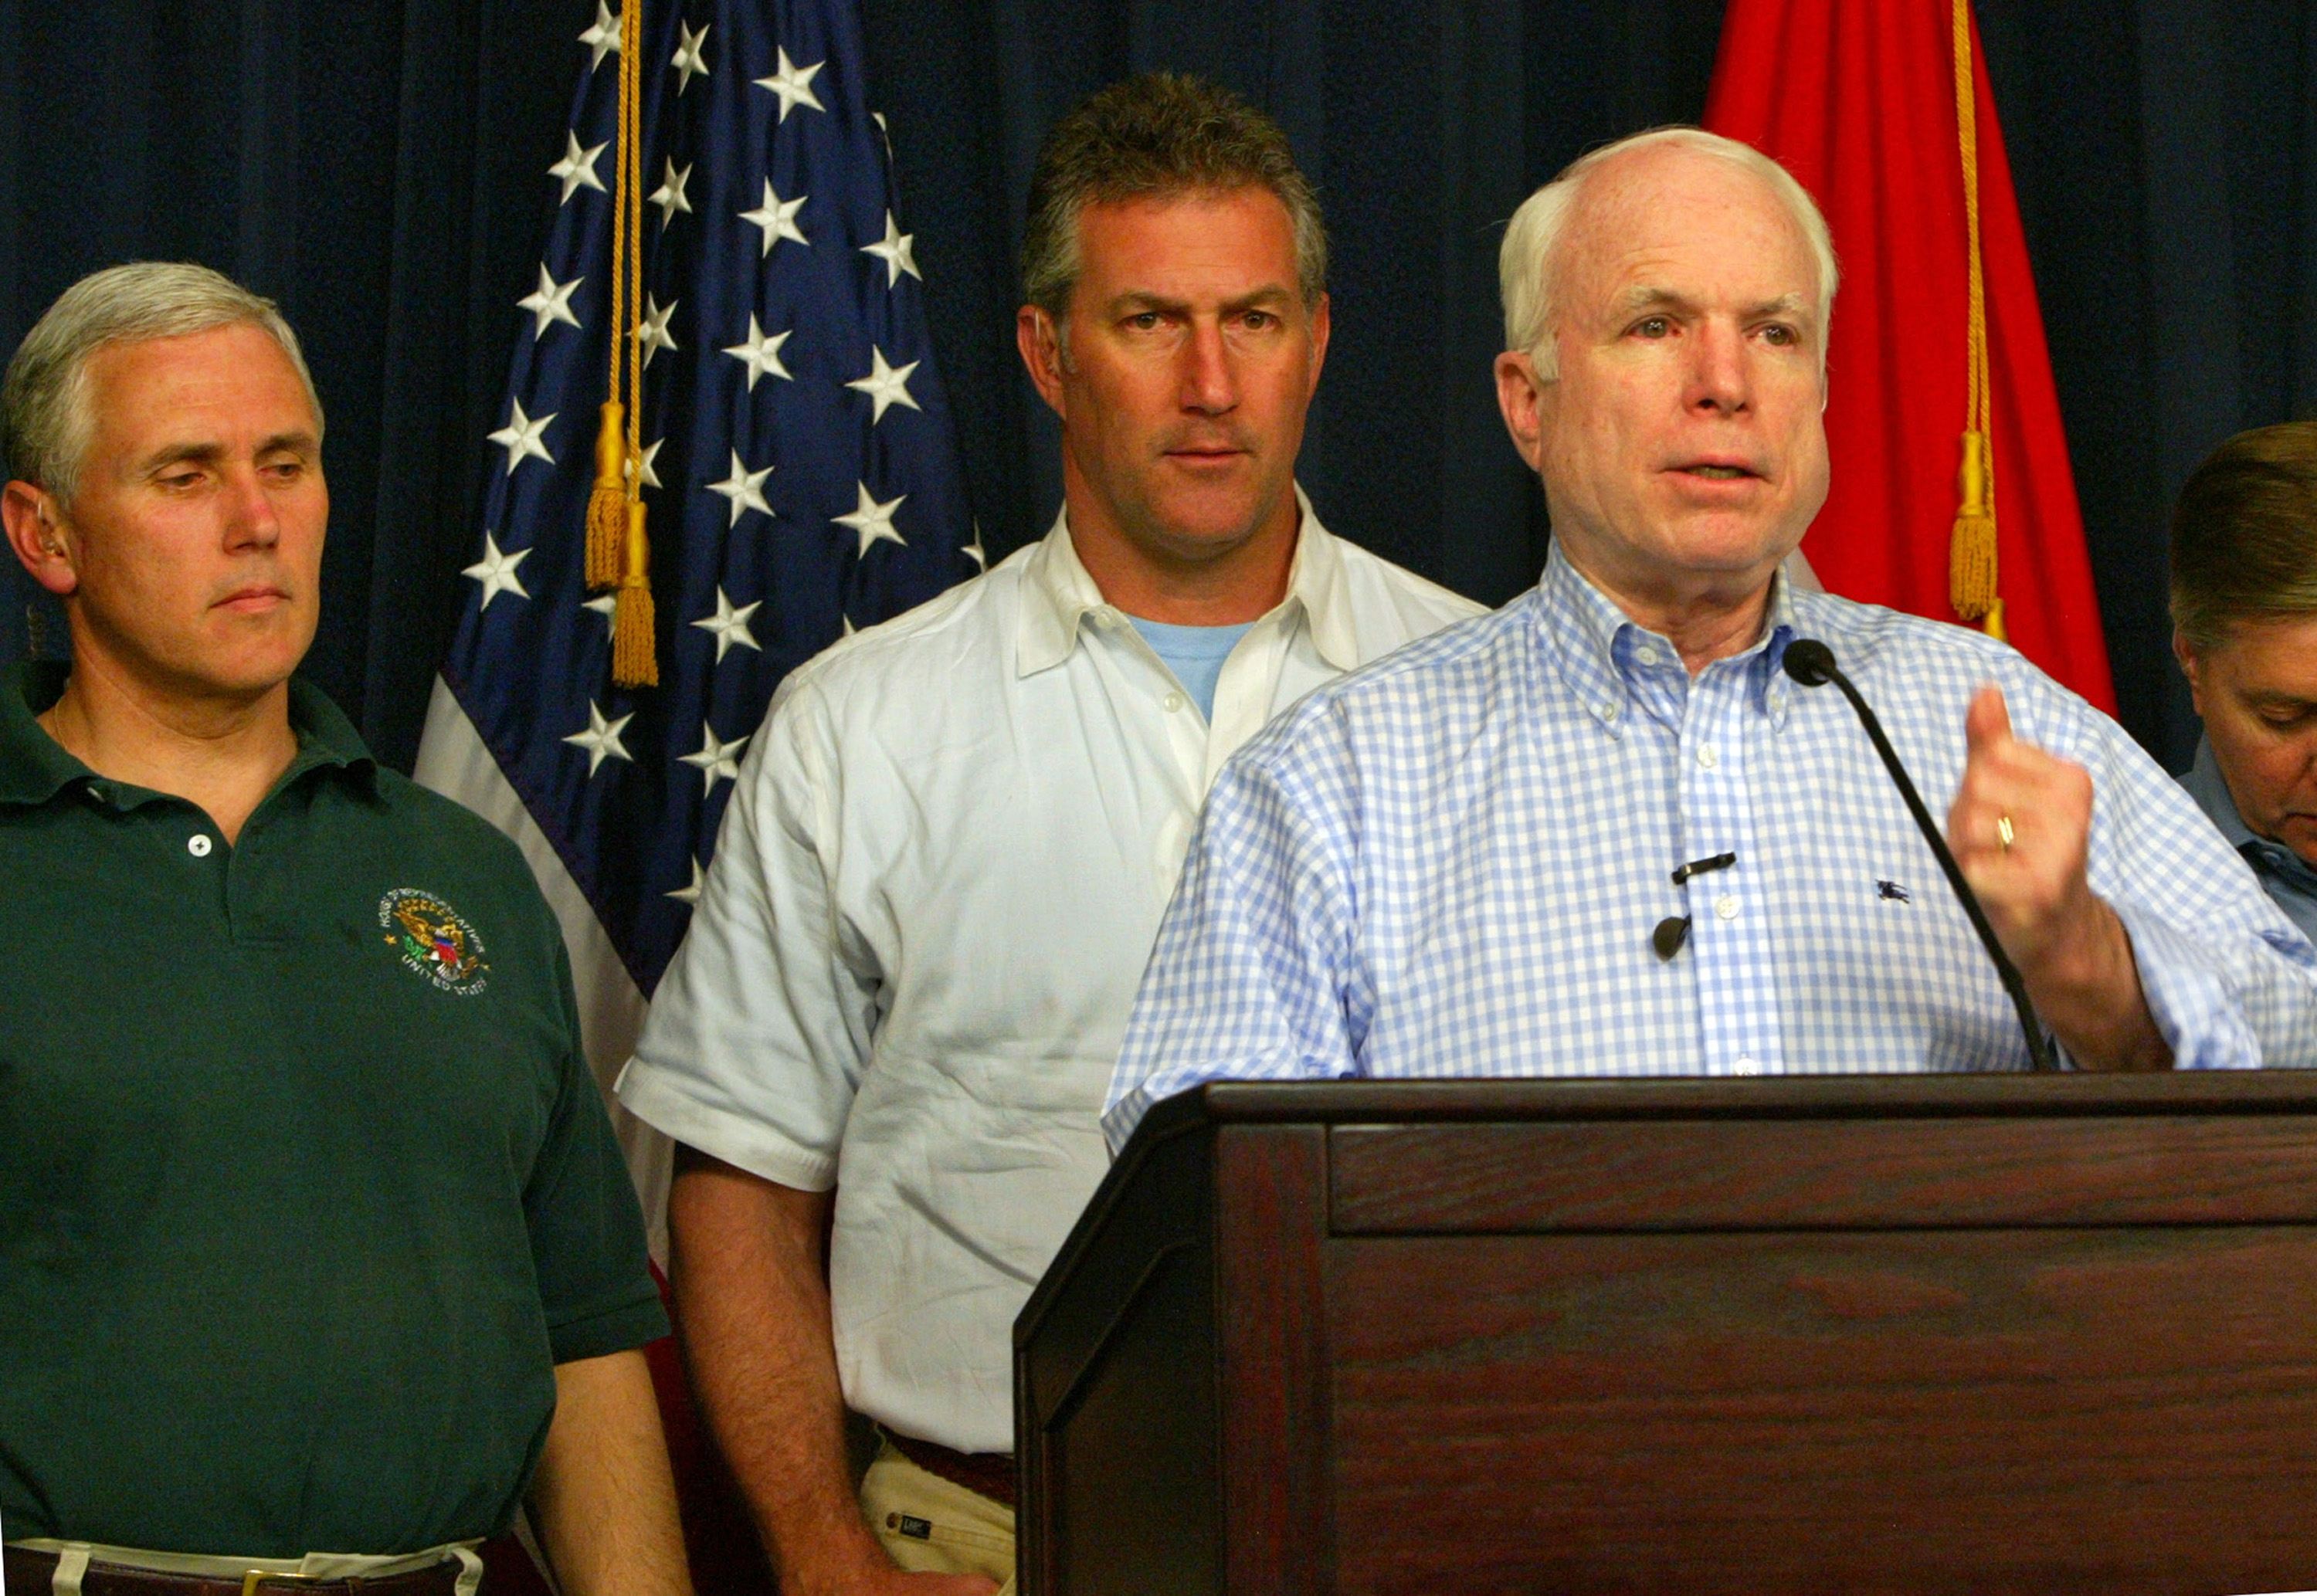 Rep. Mike Pence (R-IN) and Rep. Rick Renzi (R-AZ) look on in the fortified Green Zone April 1, 2007 in Baghdad, Iraq.